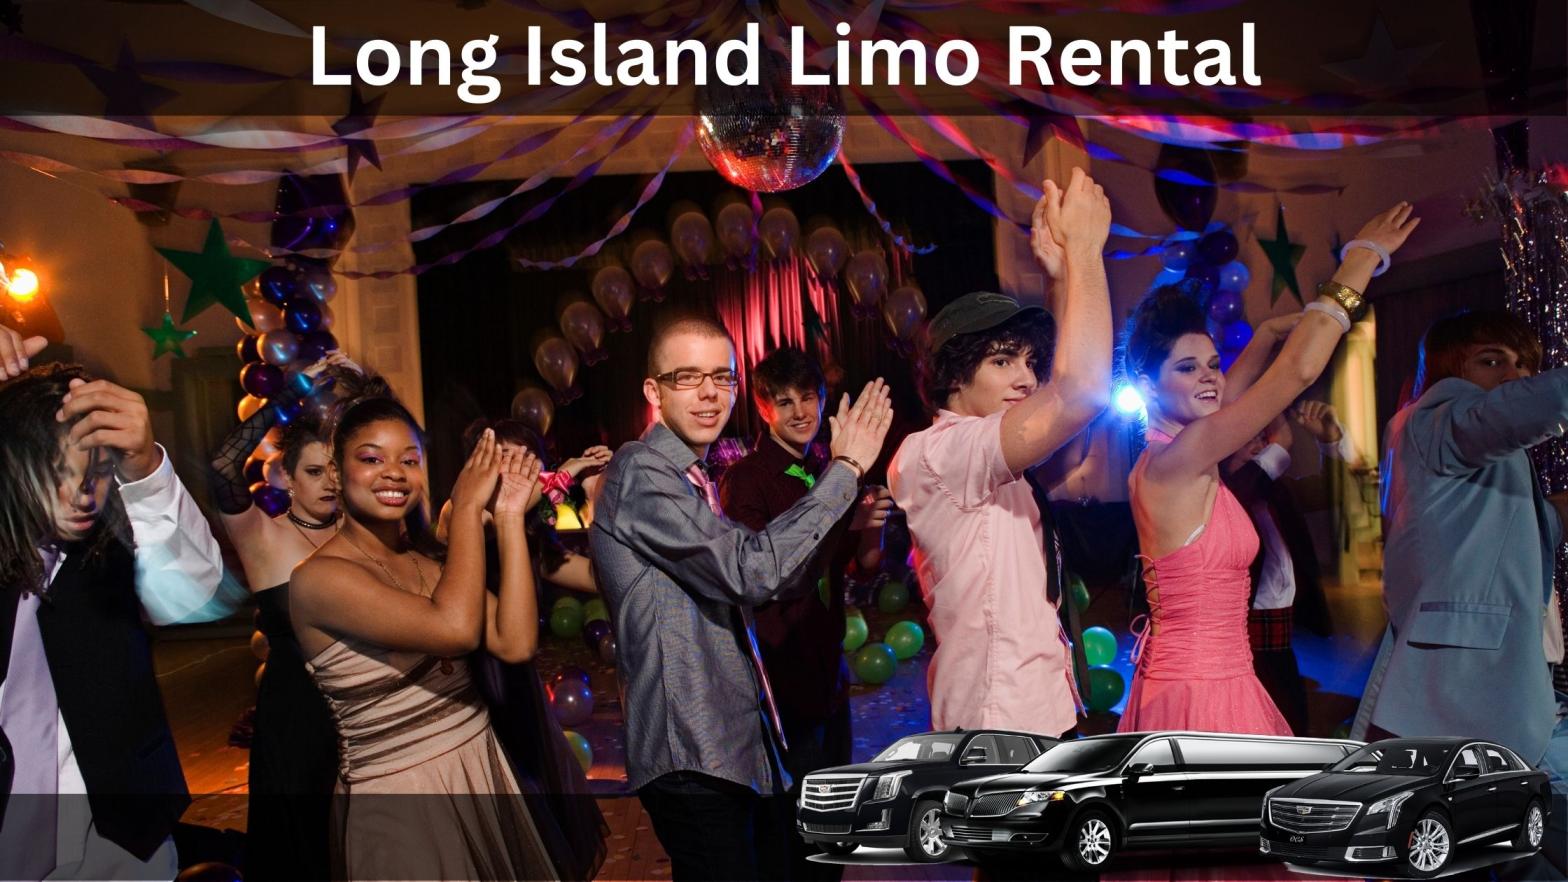 Affordable Prom Limo Service in Long Island, NY | Long Island Limo Rental